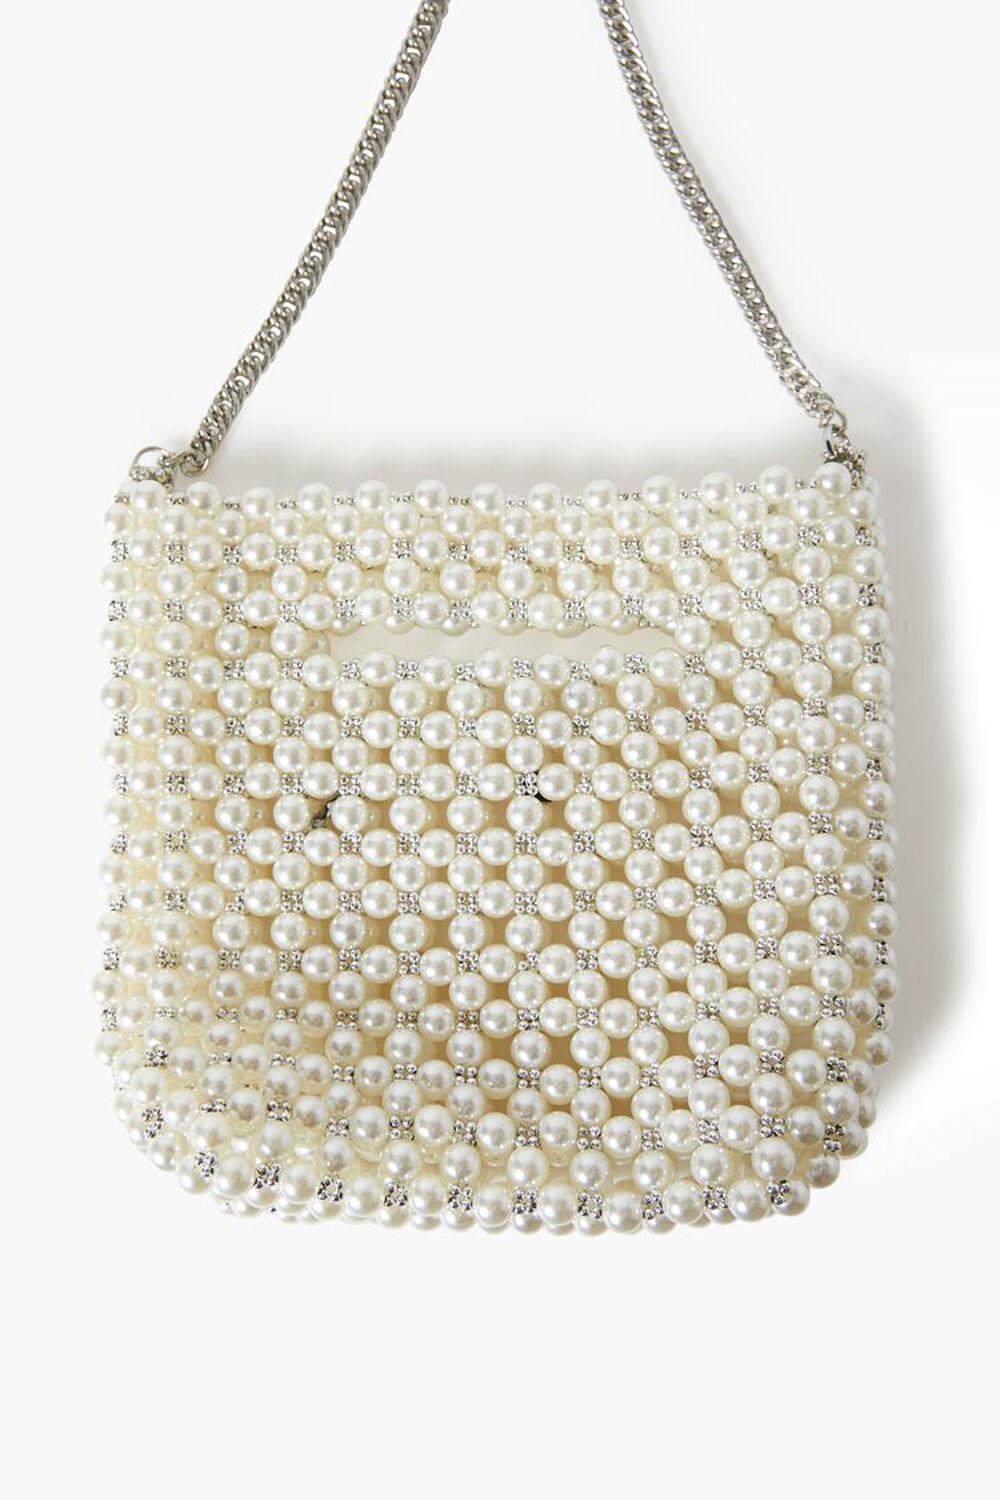 New Zara Beaded Bucket Pearl Bag With Cord Shoulder Strap